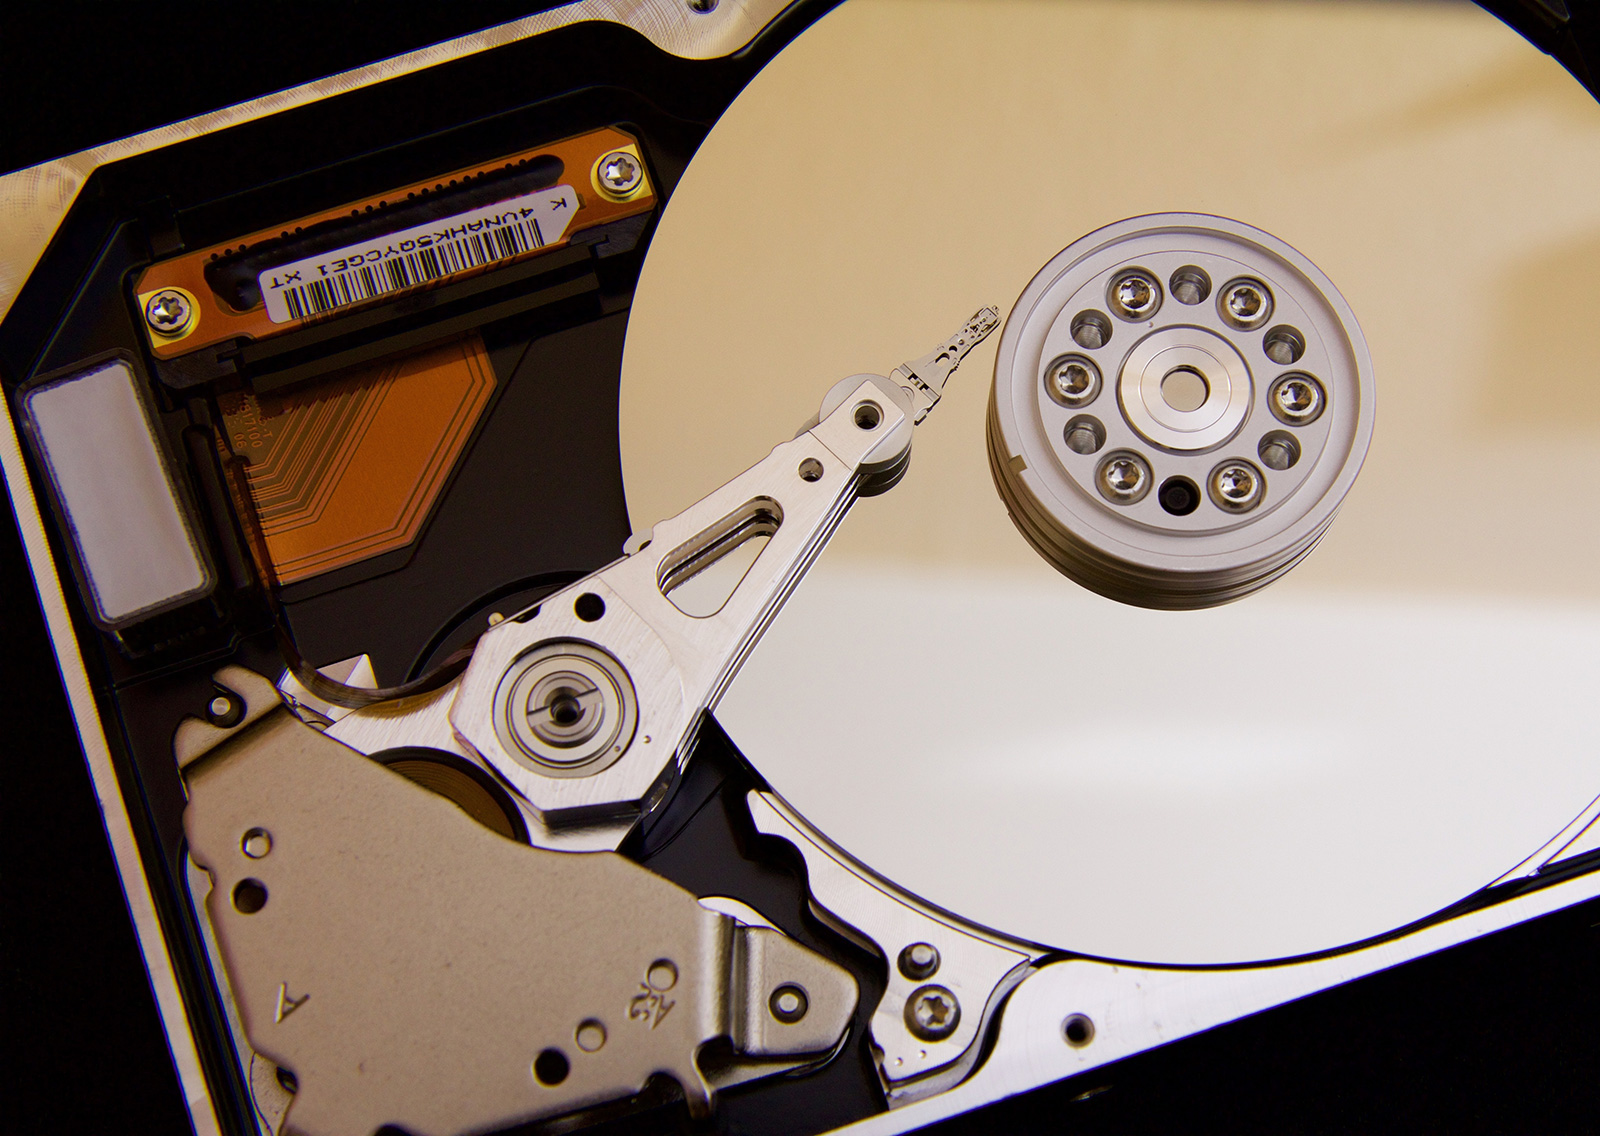 Best surveillance hard drives for NVR, DVR and security cameras